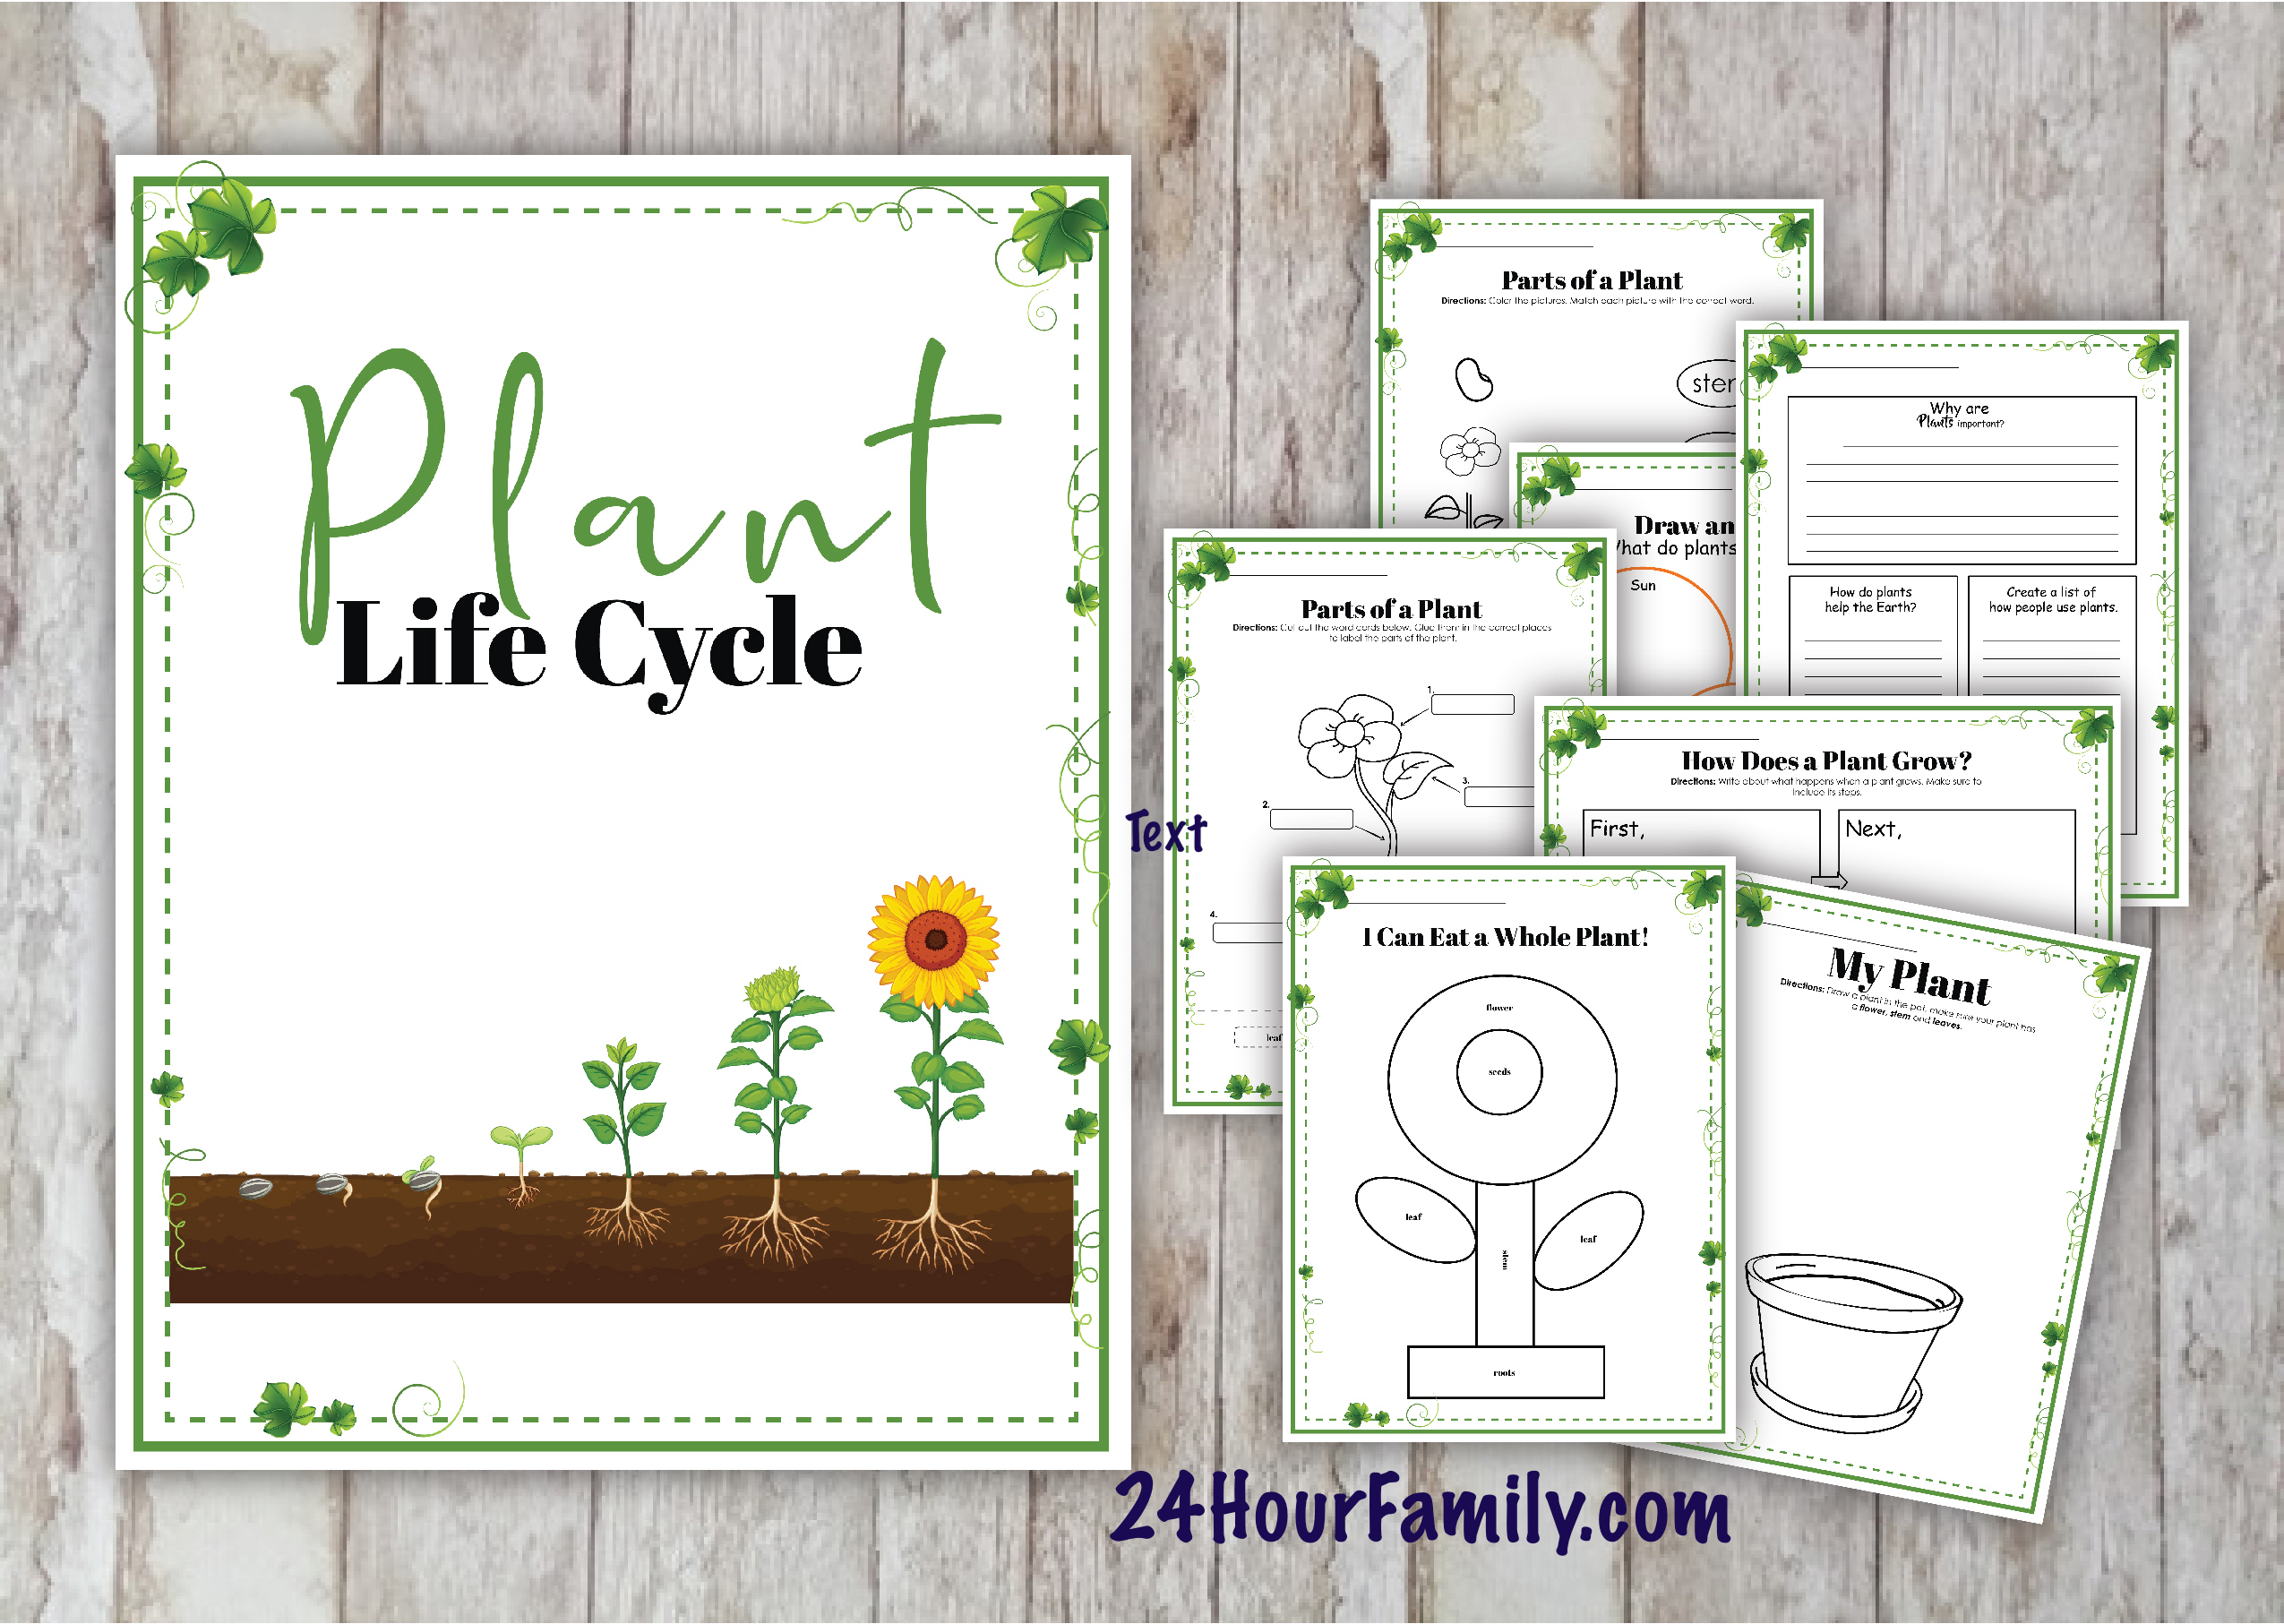 Parts of a plant worksheet for kids